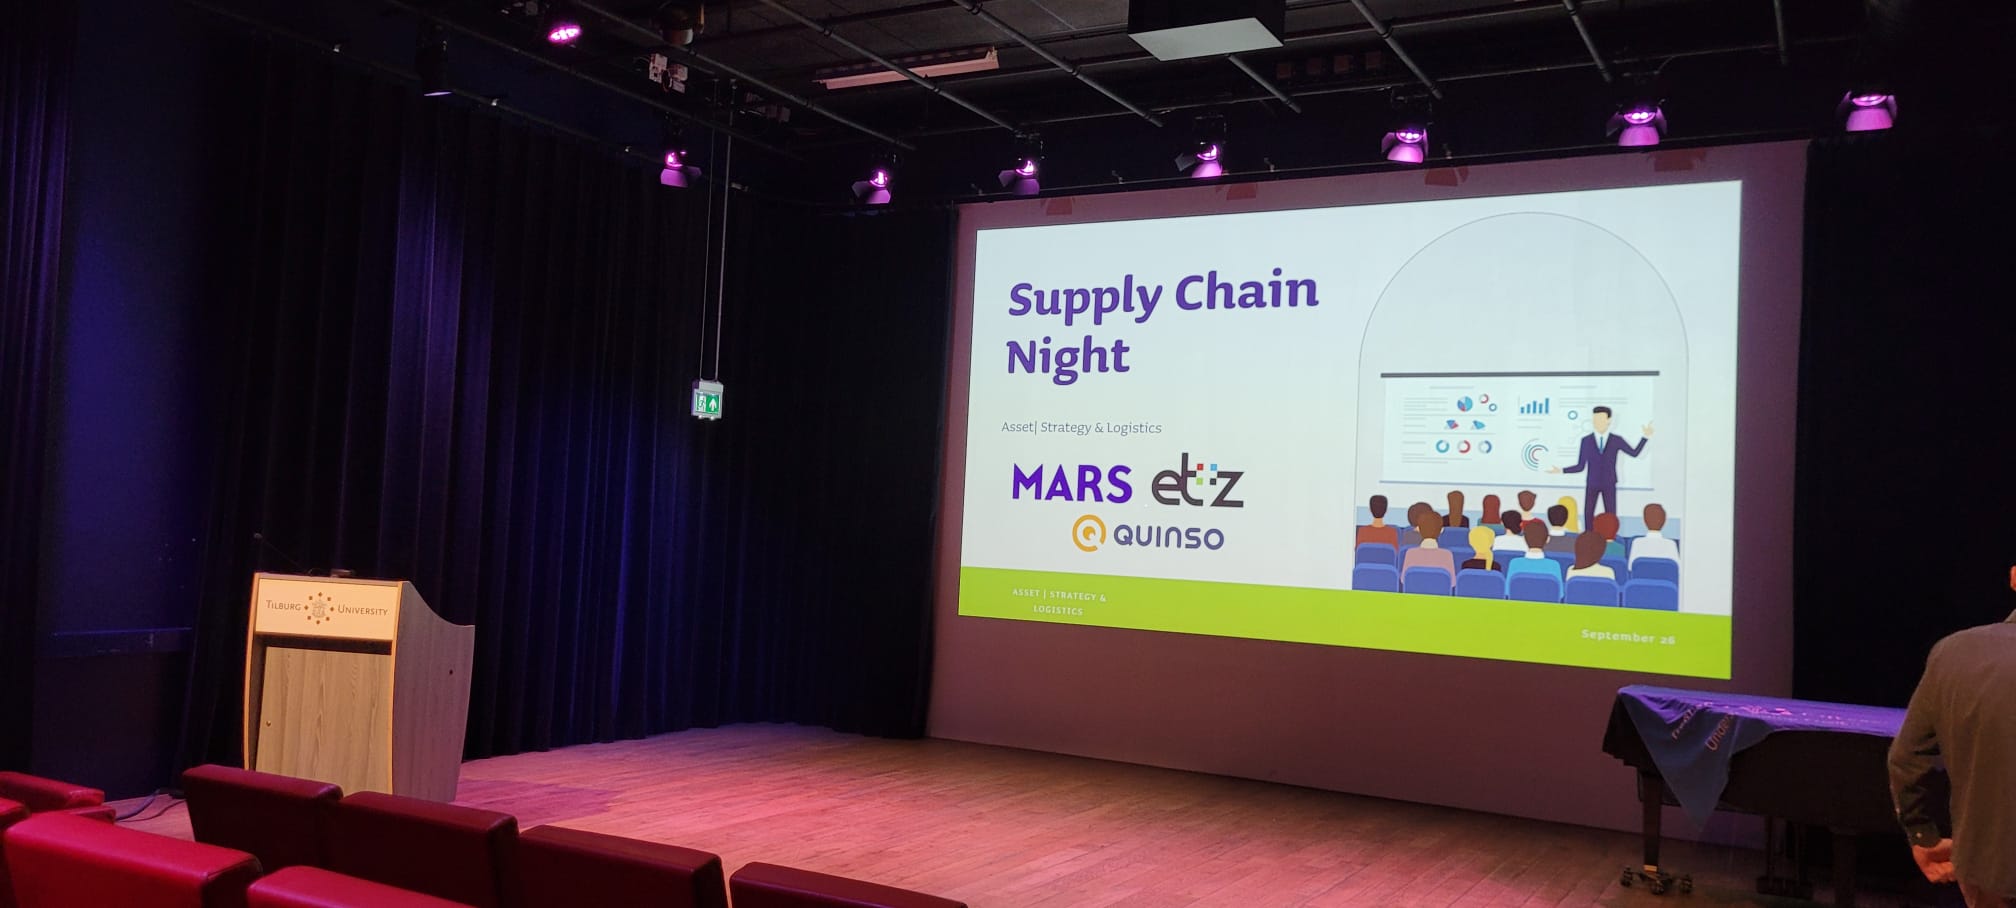 Looking back on a successful Supply Chain Night at Tilburg University